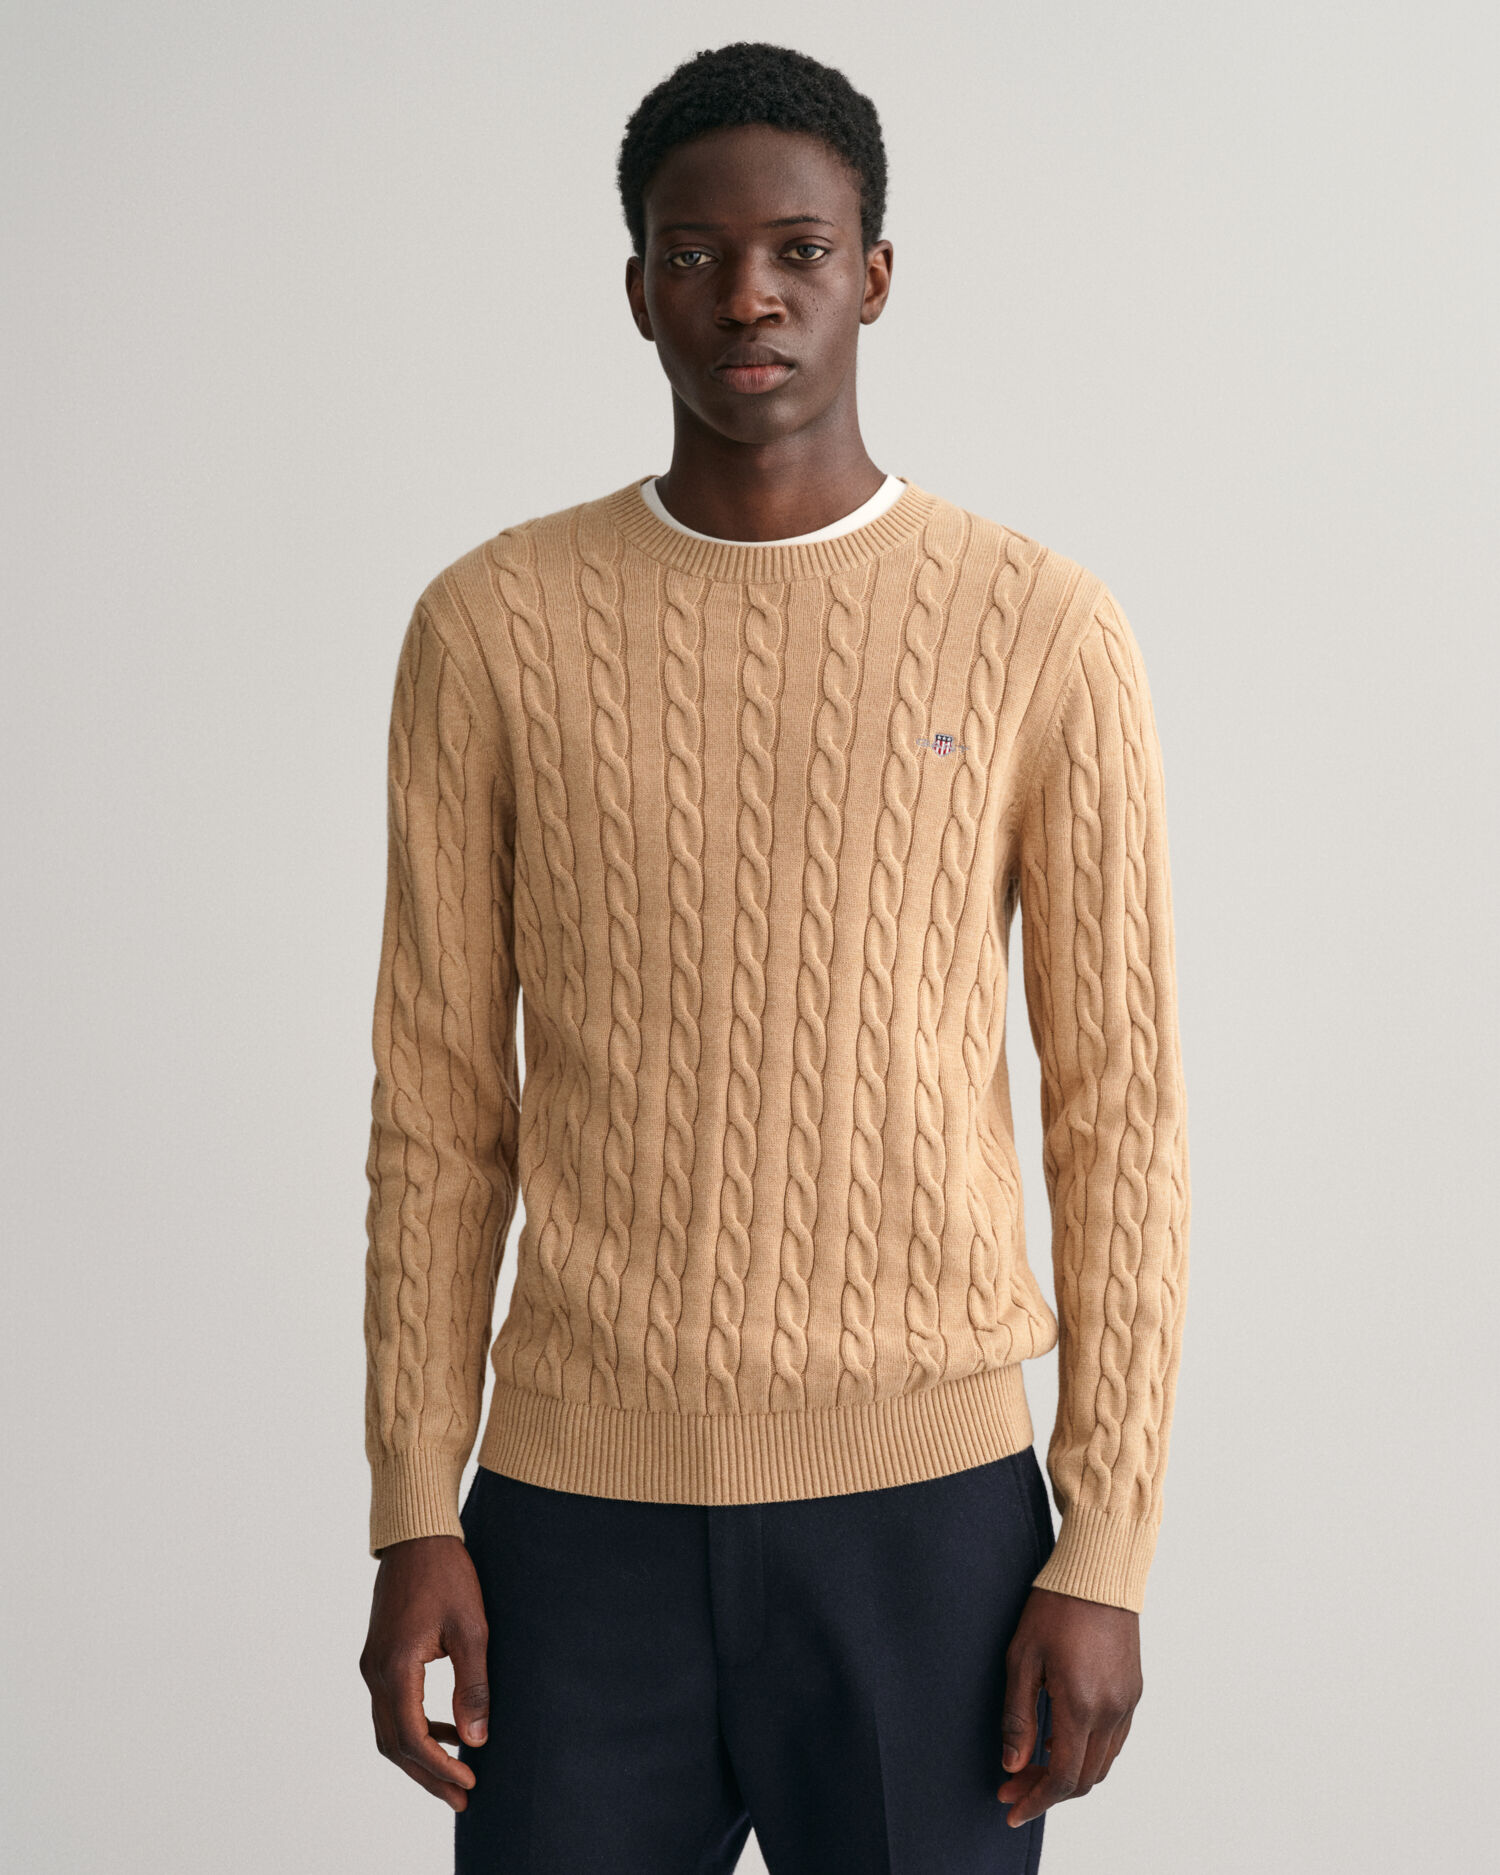 Crew Neck Cable Knit in Worn White | Outlet | Wrangler®